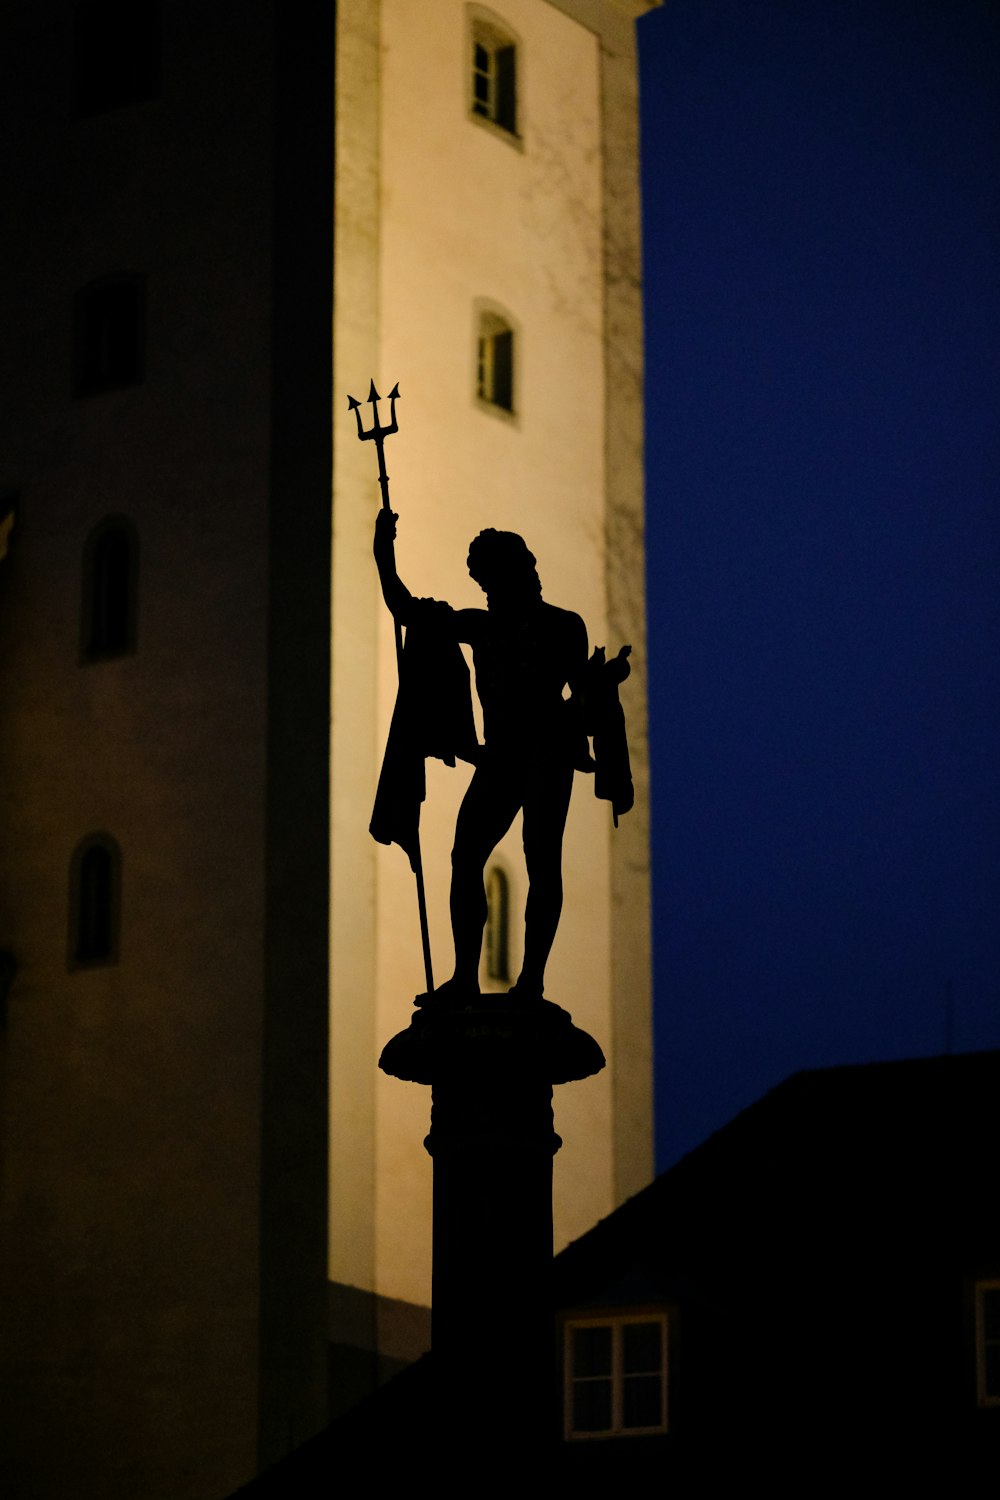 a statue of a man holding a sword in front of a tall building